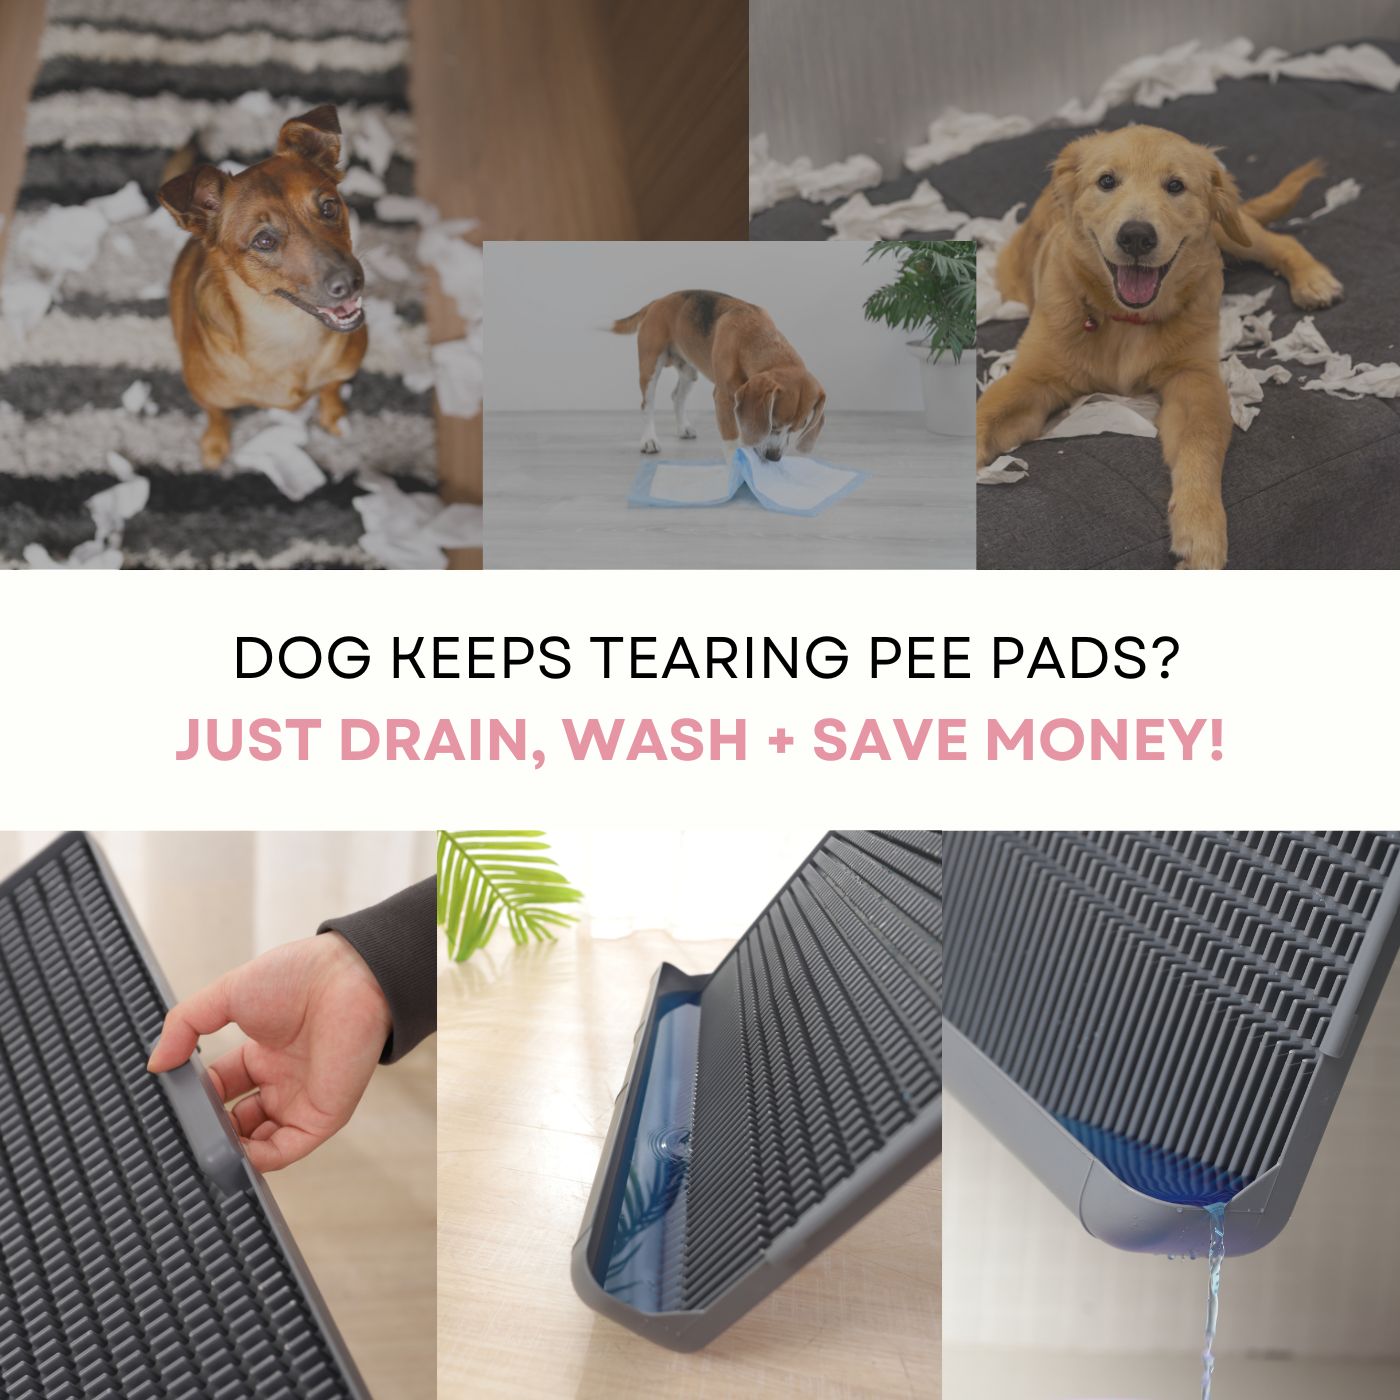 Easy-Wash Connectable Dog Puppy Potty Tray for Indoor or Patio Use (Reusable)